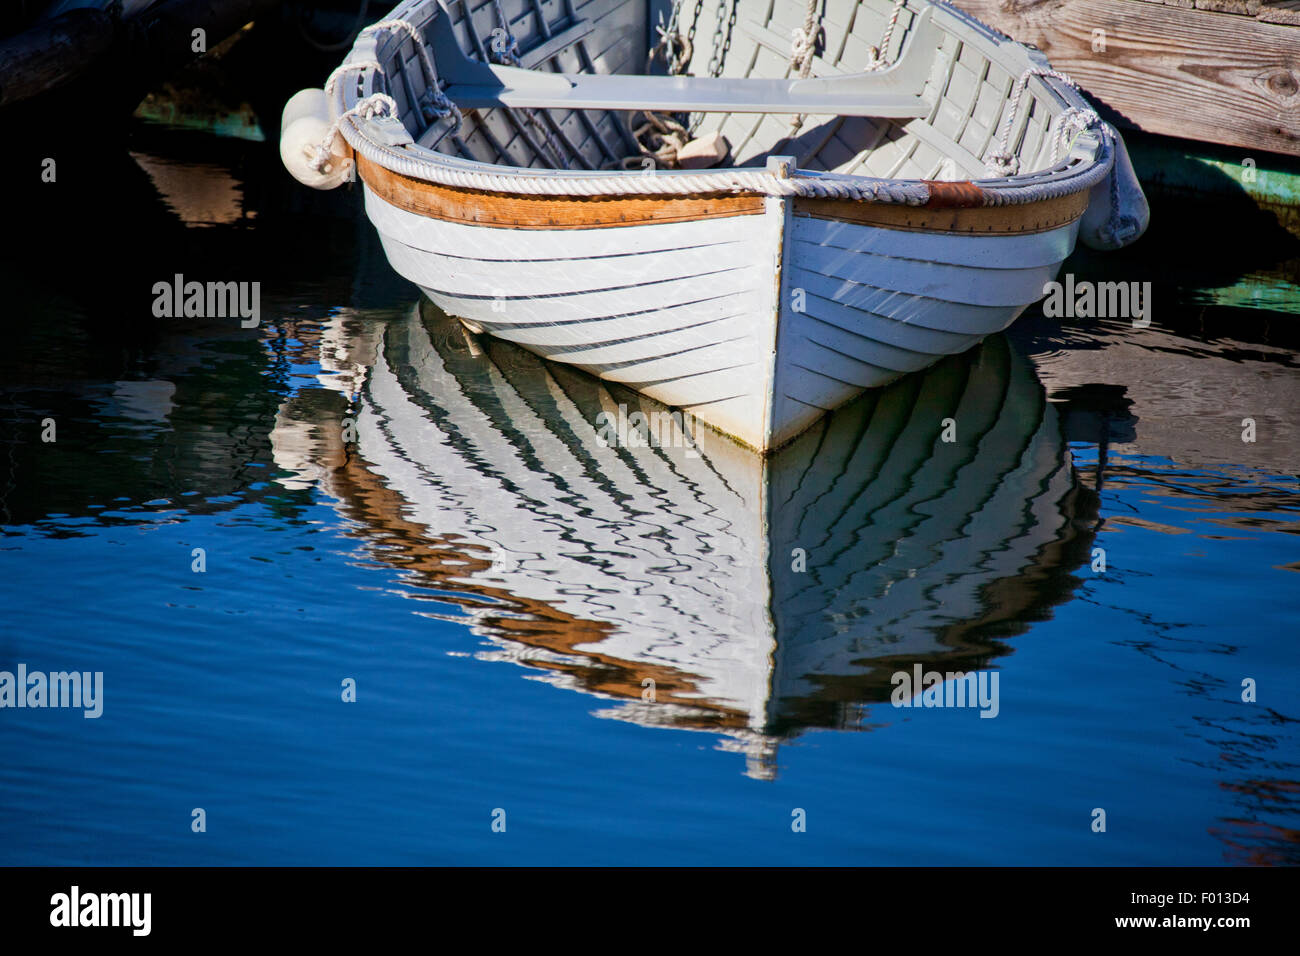 Pleasing reflections of a bright white wooden dinghy tied to a wooden dock in Camden Harbor in Maine Stock Photo